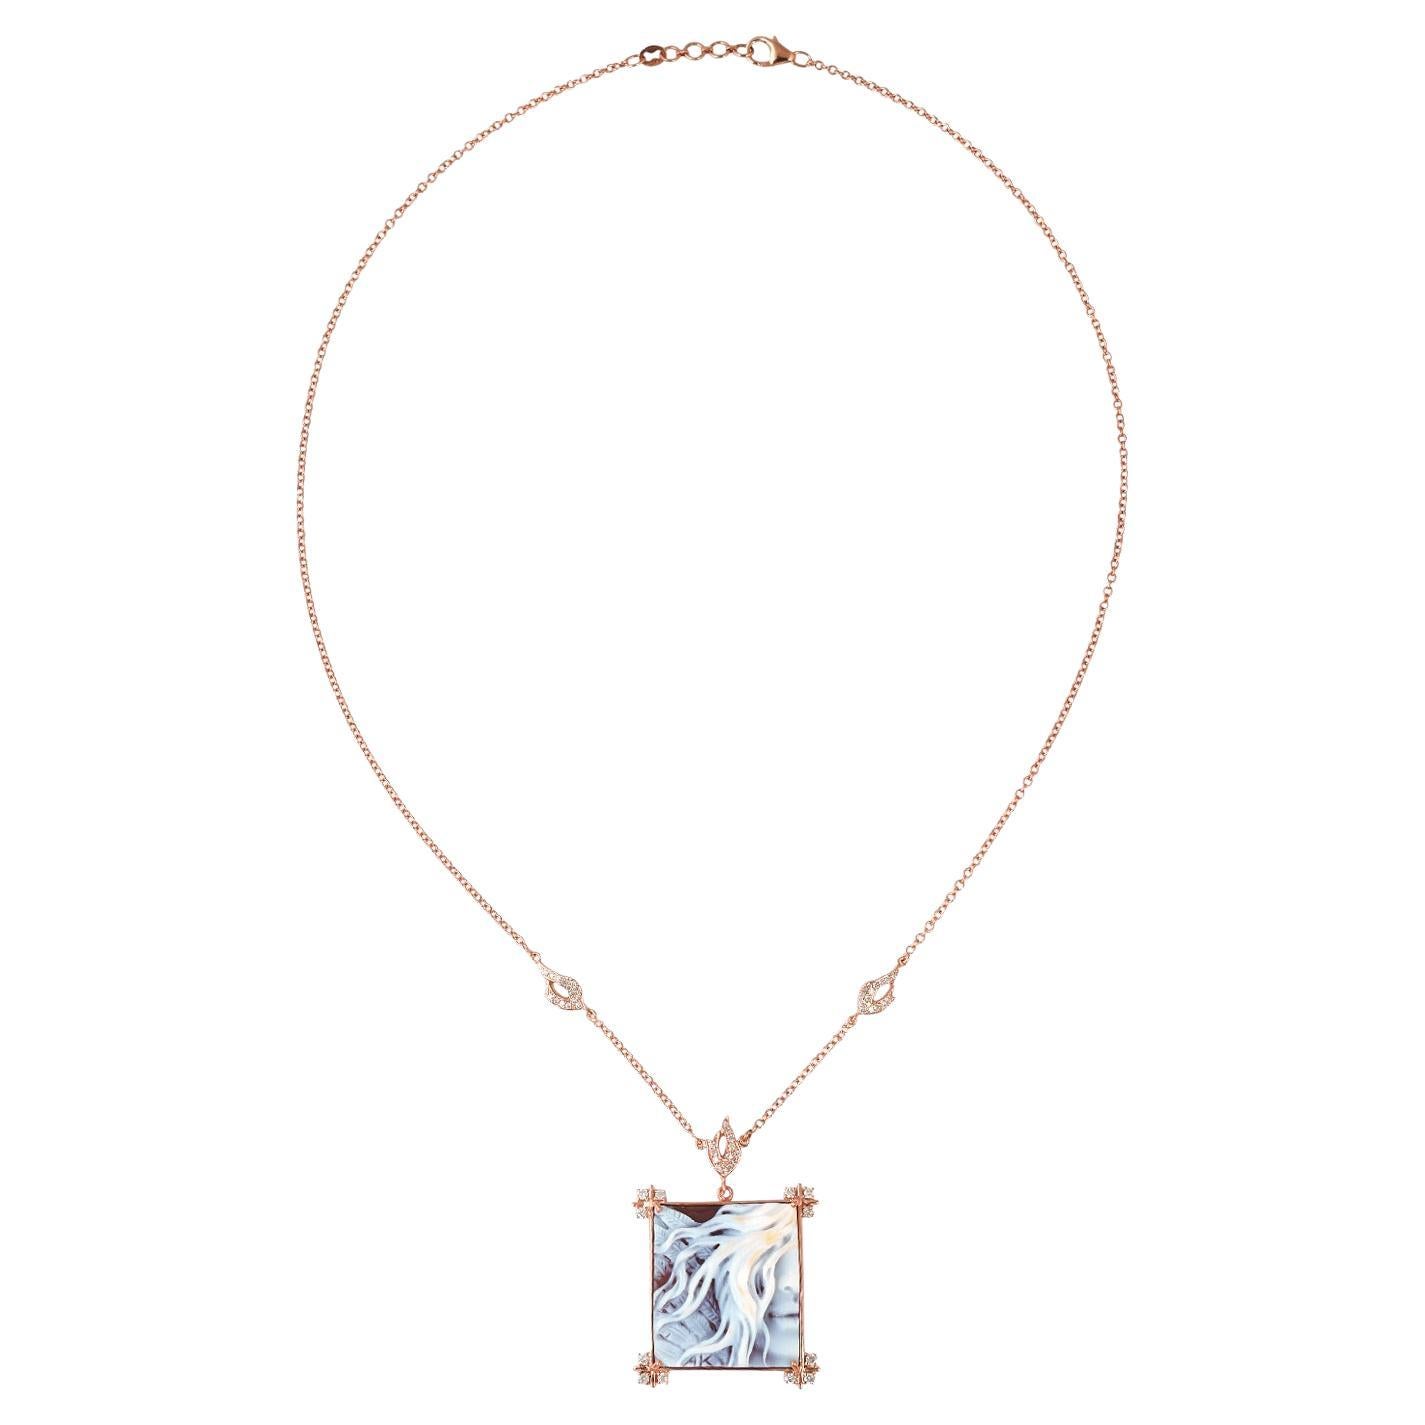 12.60 ct Shell Cameo pendant Necklace With Diamonds Made In 18k Rose Gold For Sale